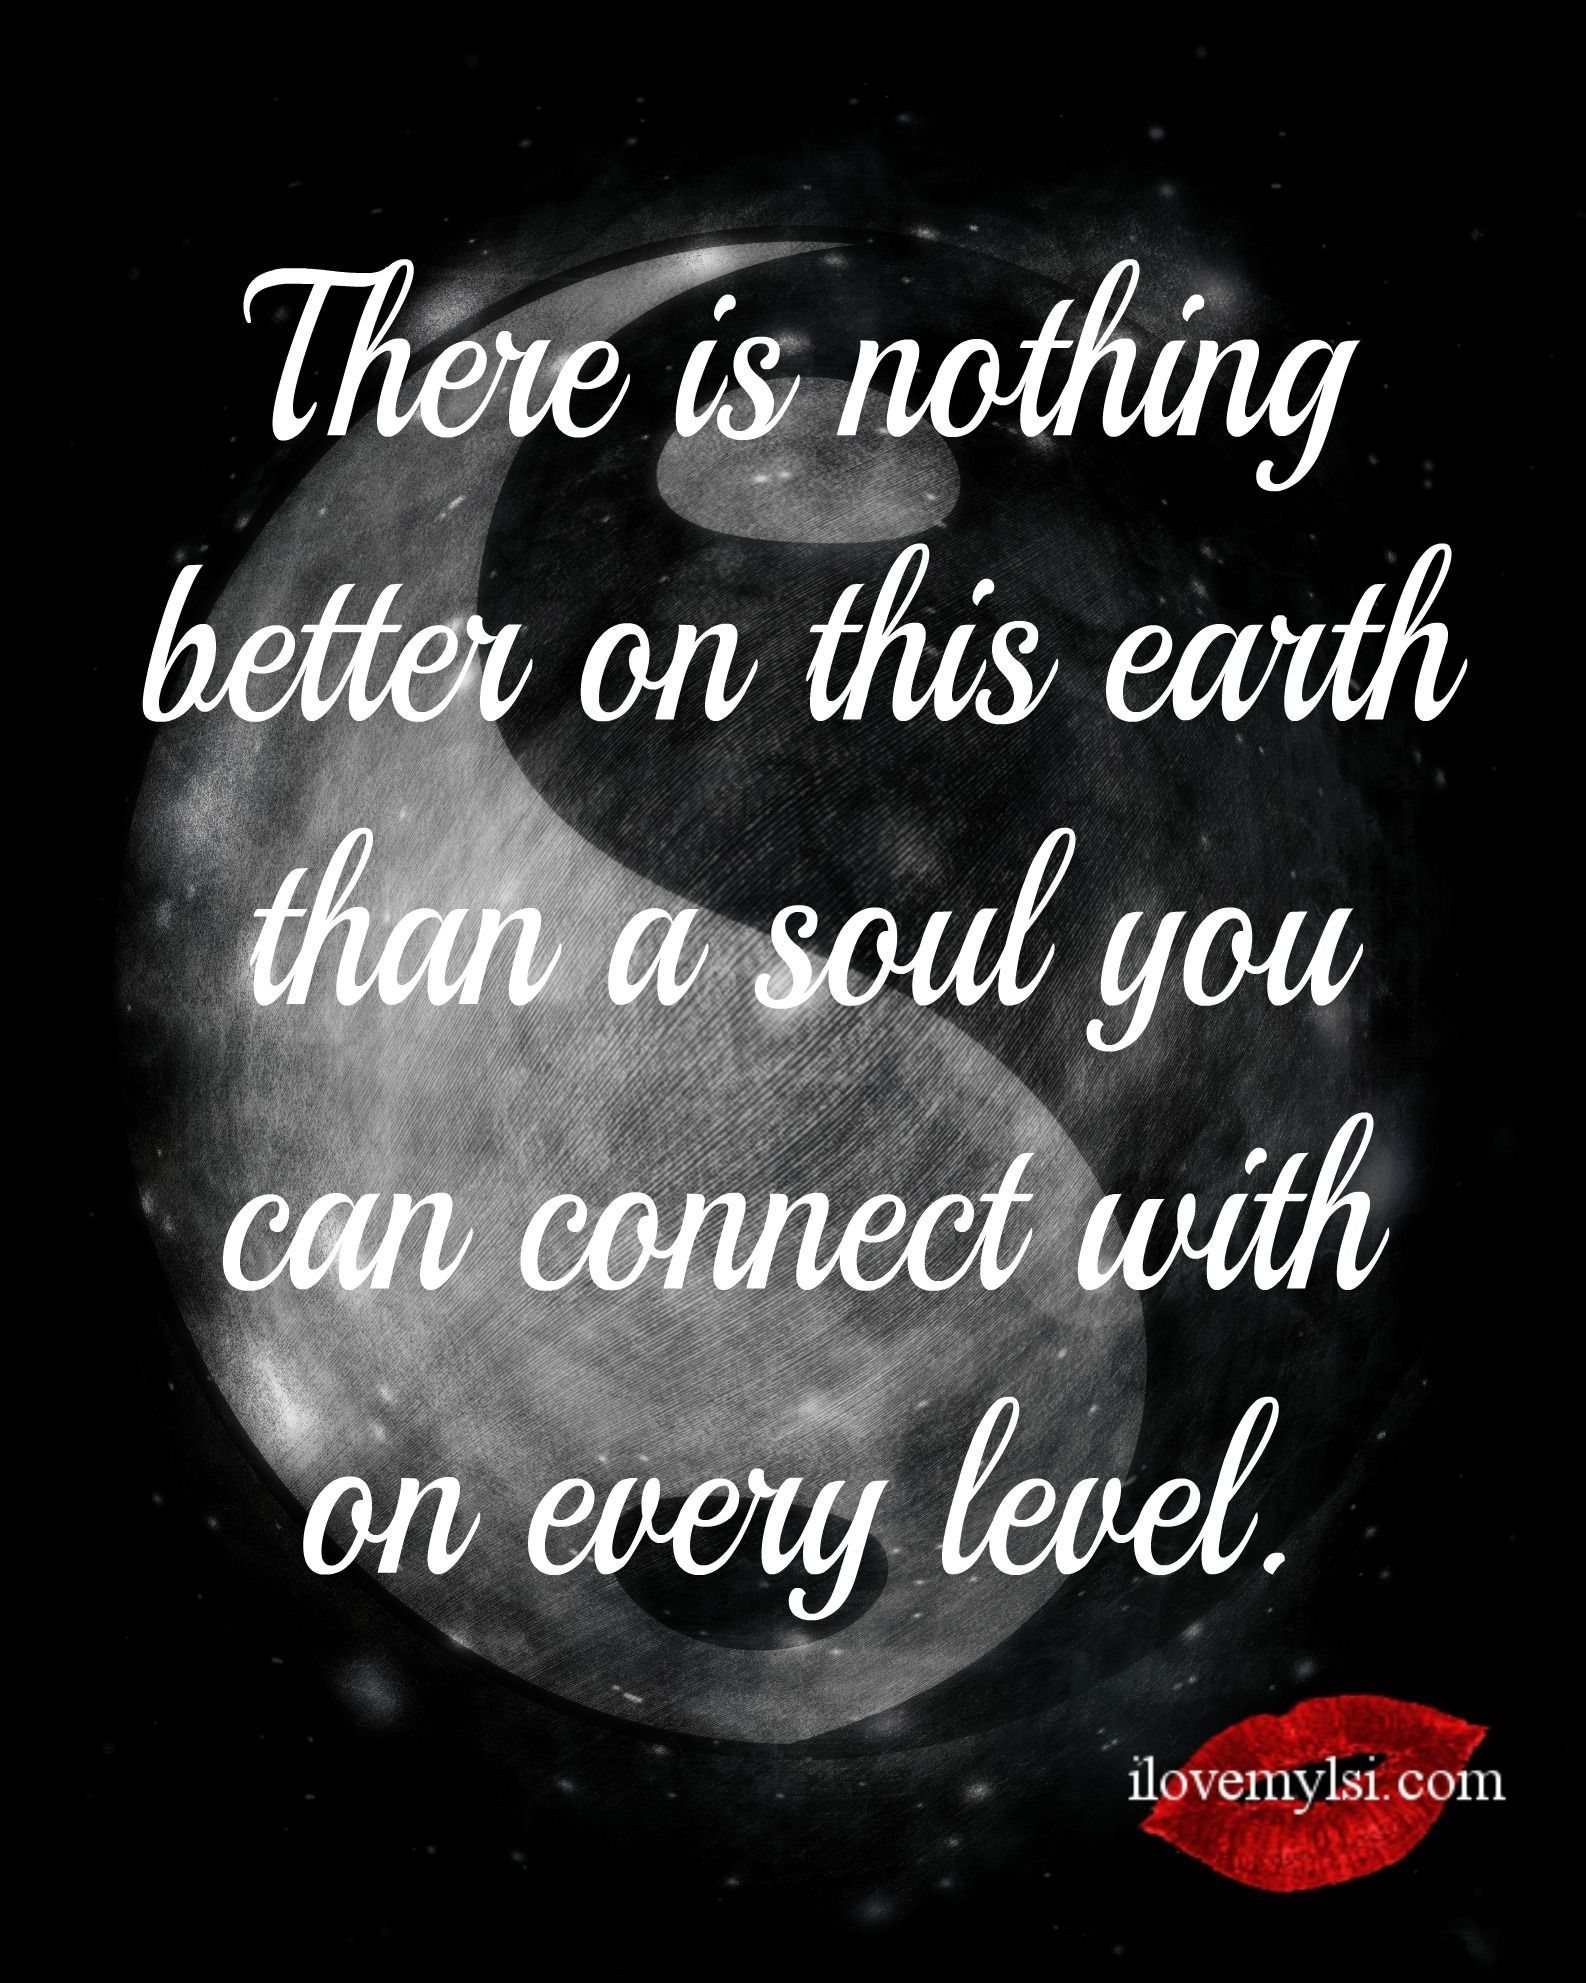 There is nothing better on this earth than a soul you can connect with on every